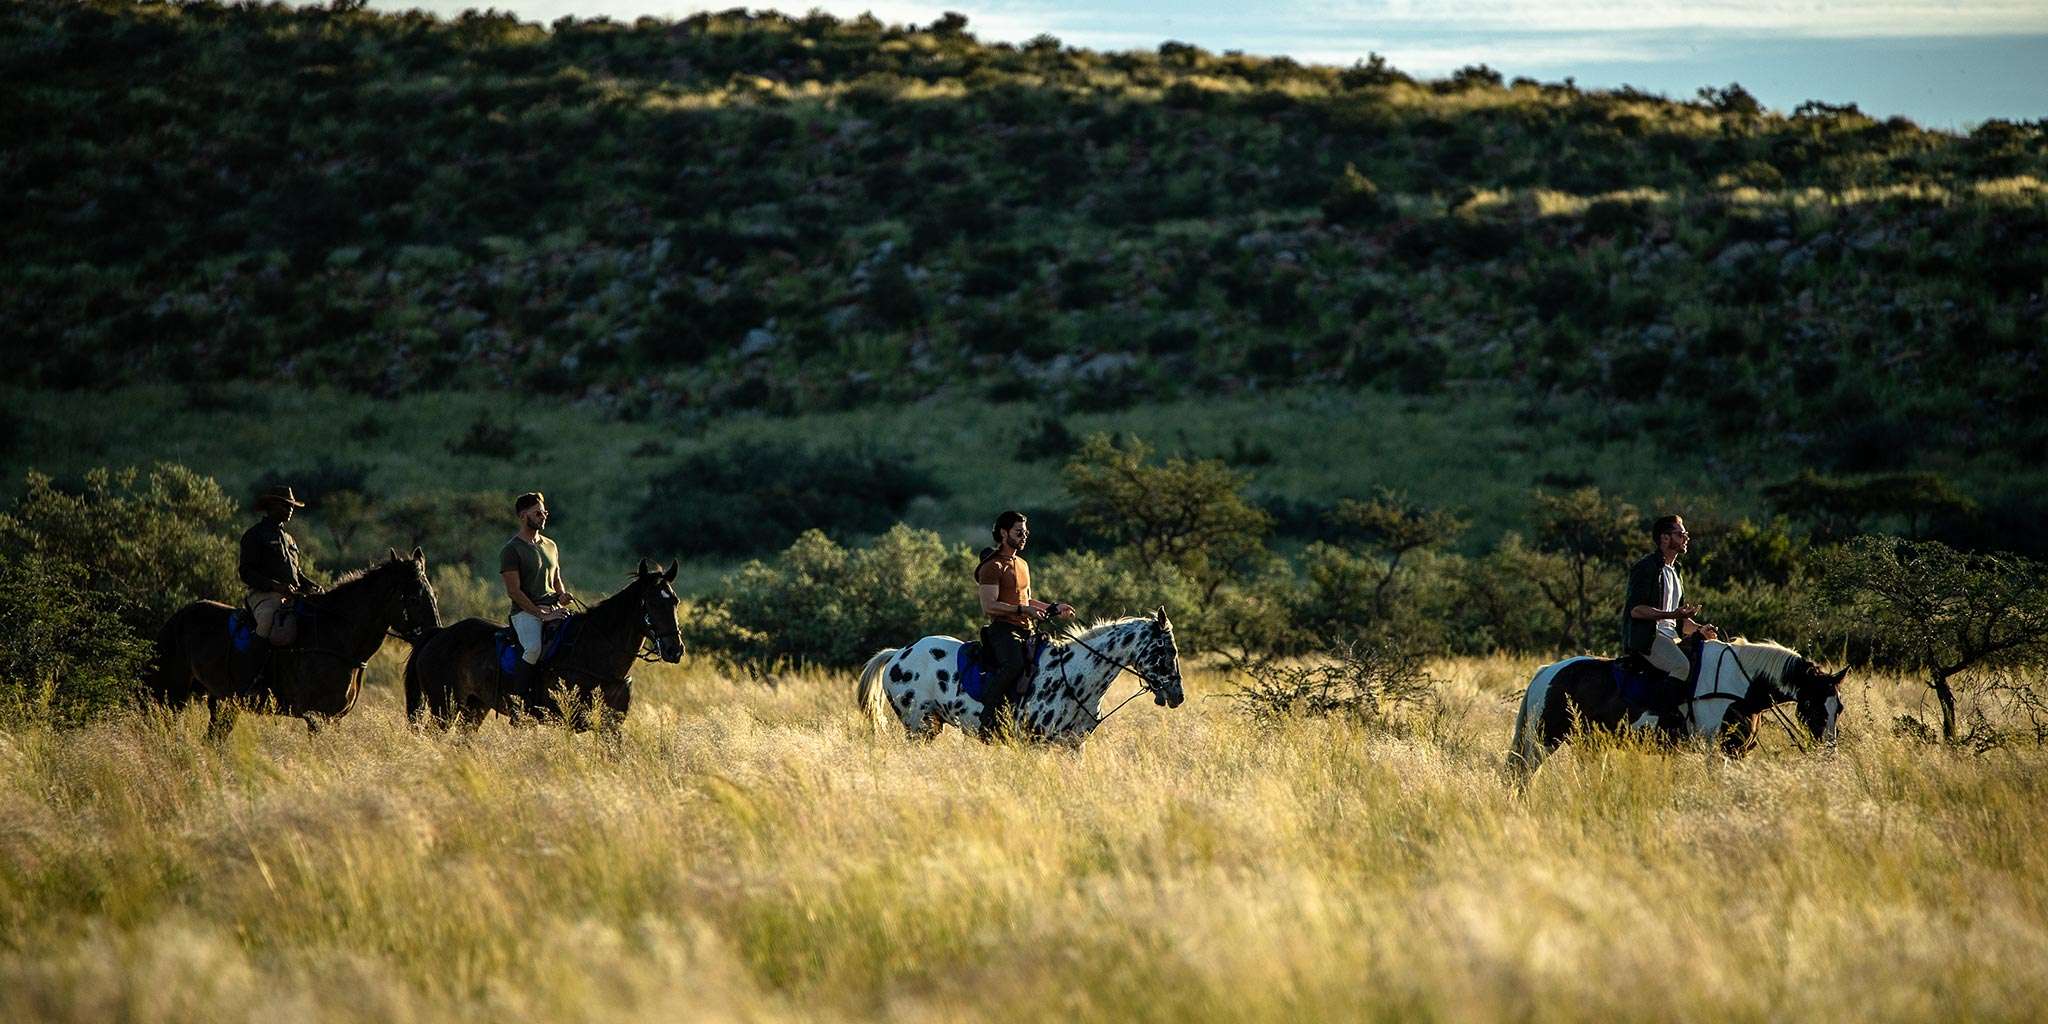 One of the best ways to traverse Africa’s wide-open spaces is on horseback